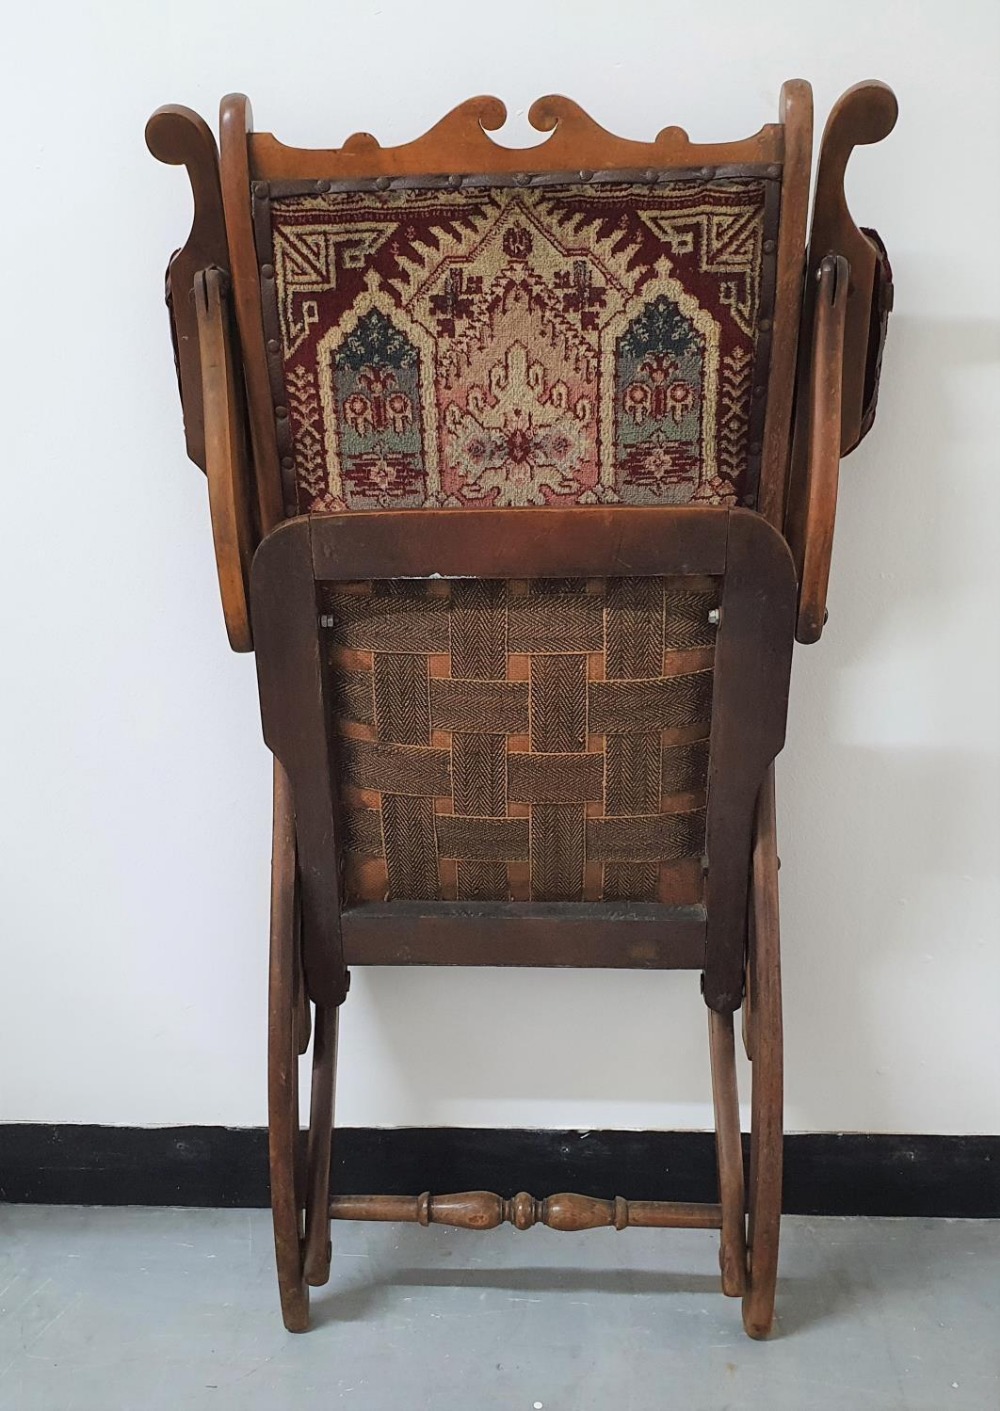 Victorian campaign chair, 87 x 58 x 62 cm - Image 5 of 5